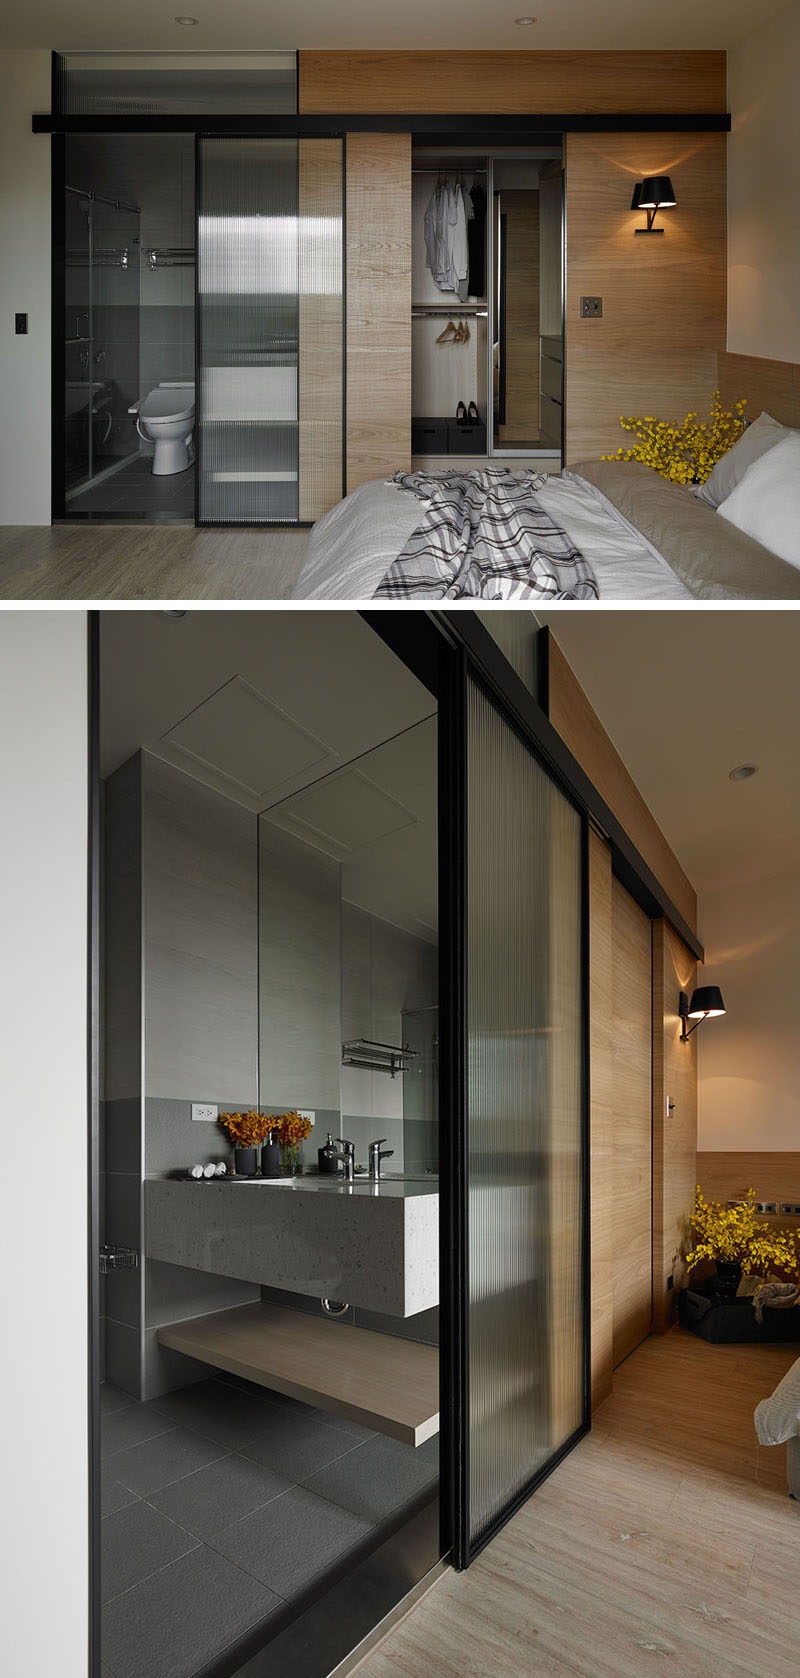 This ensuite-bathroom has a glass door to let natural light through to the bathroom.